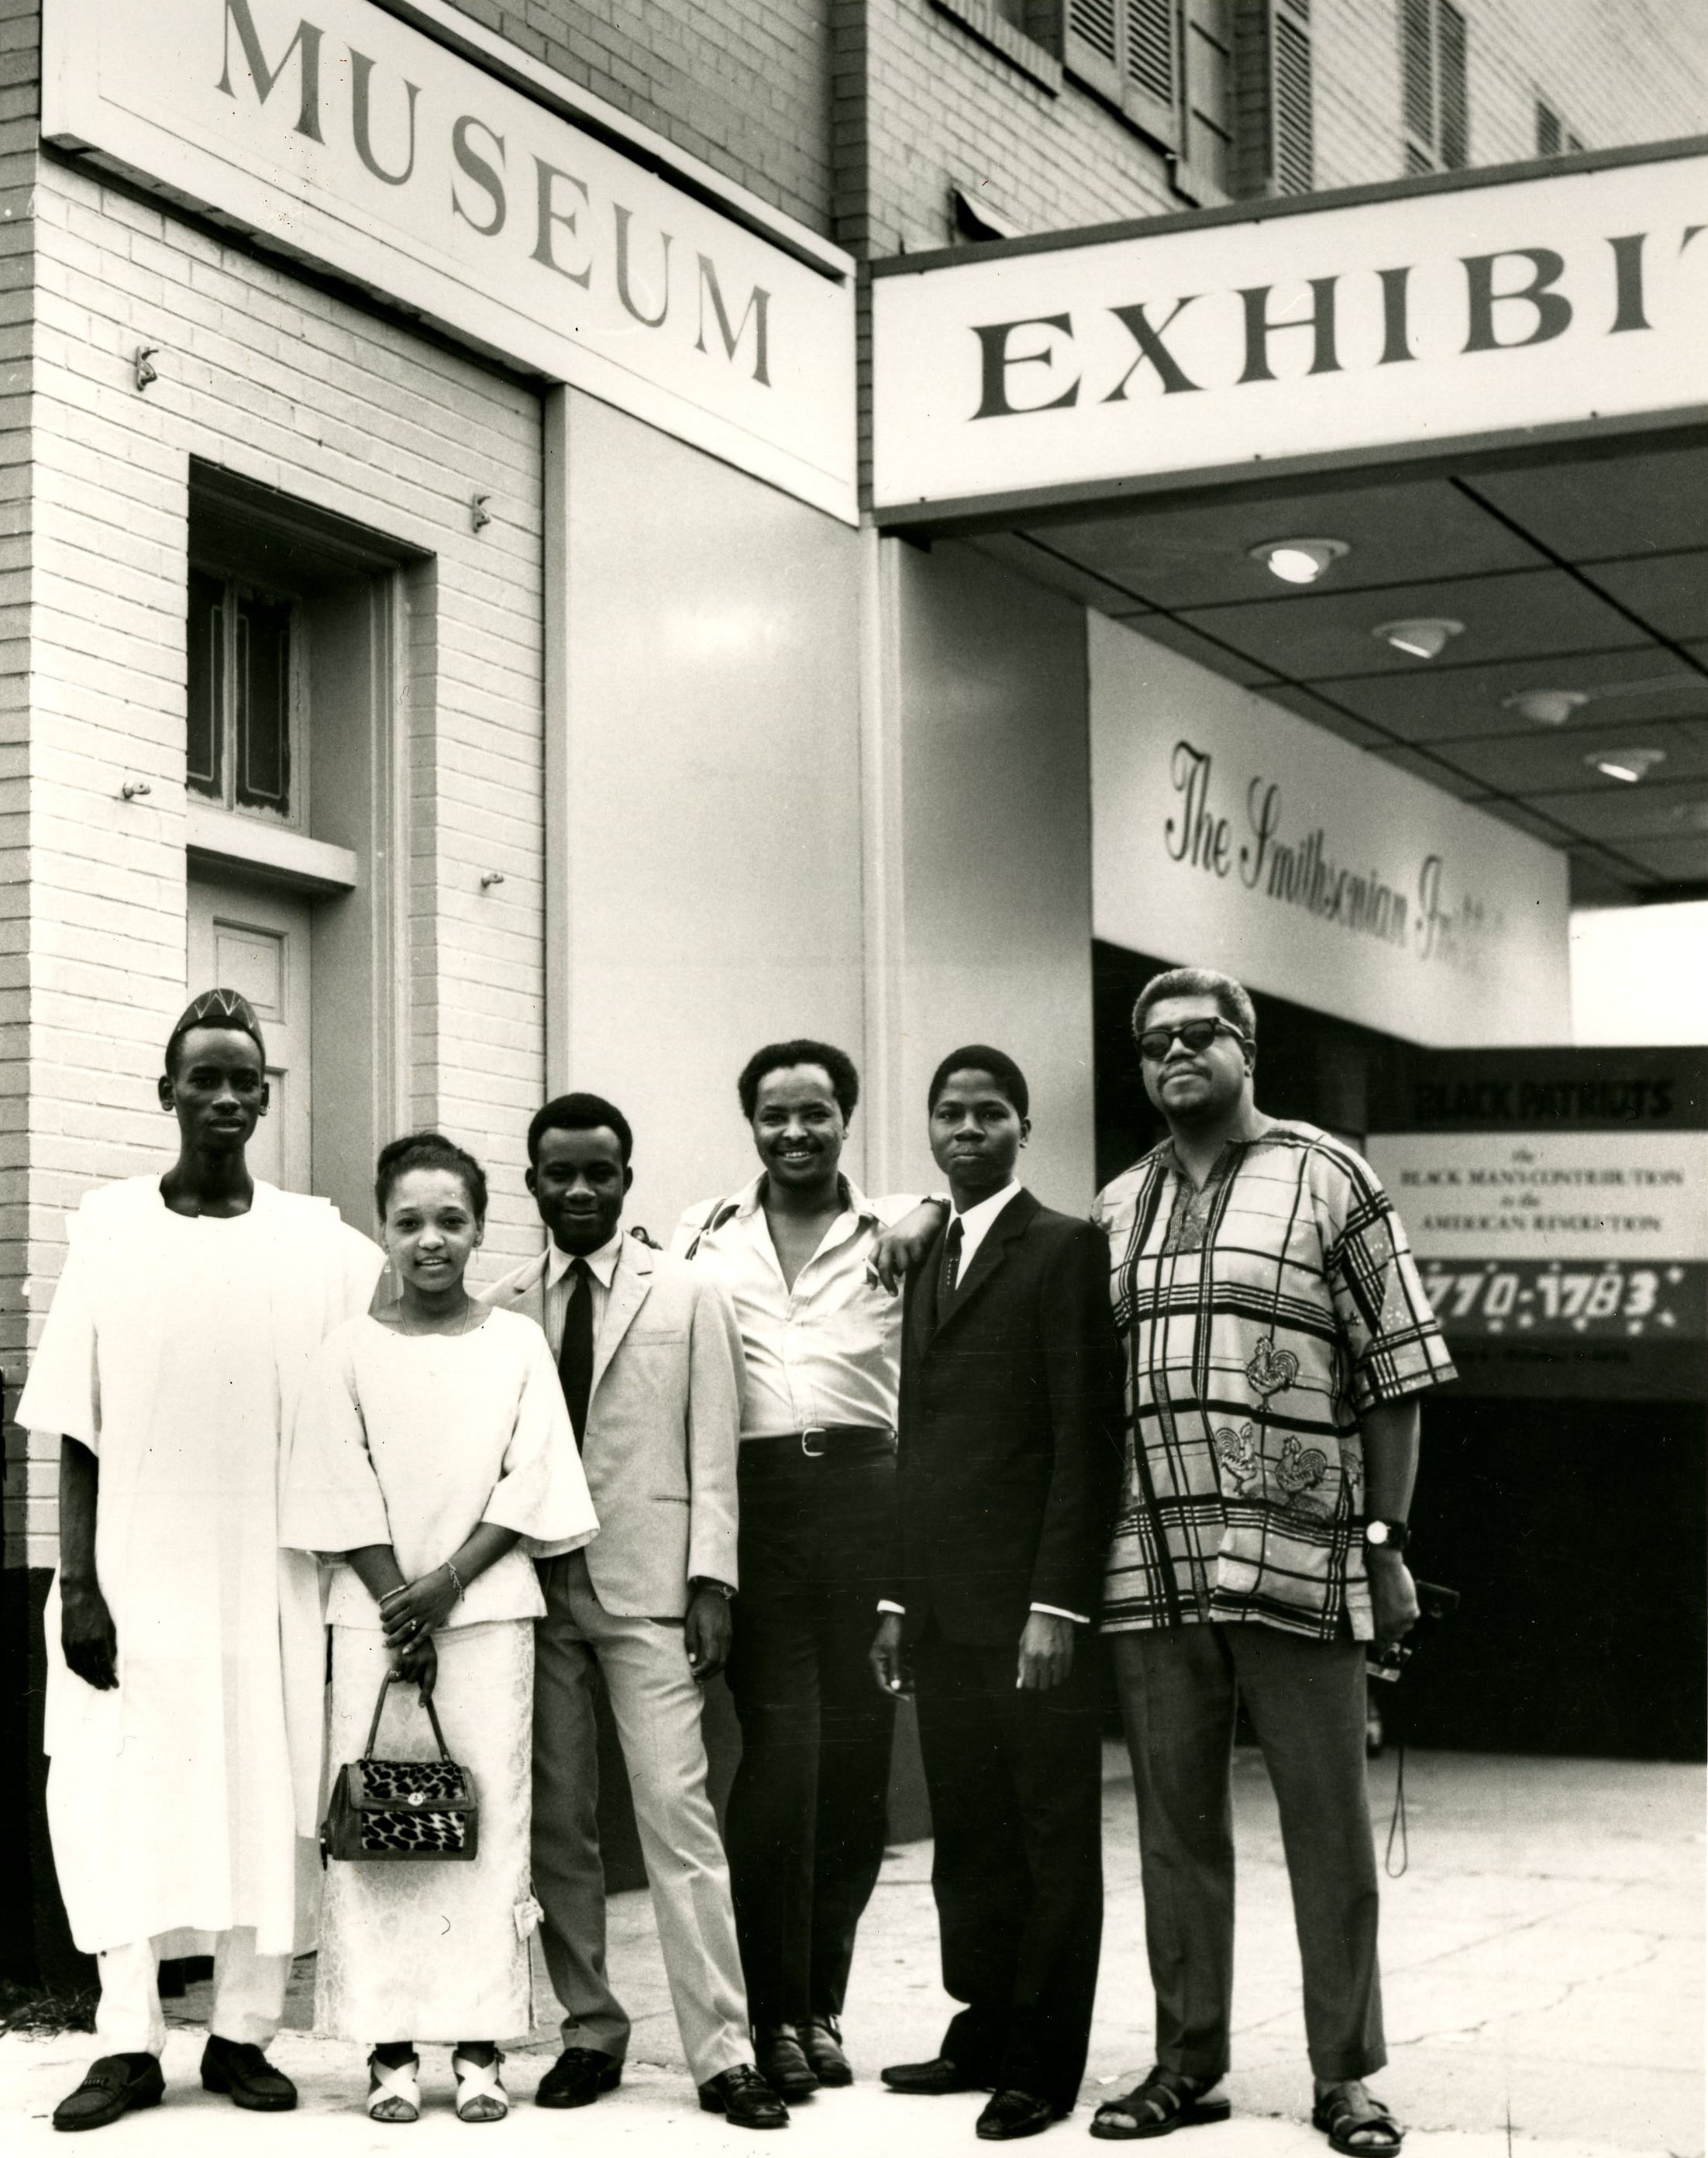 Fellows, second from the left, stands with five men in front of the Museum, then at the Carver Theat